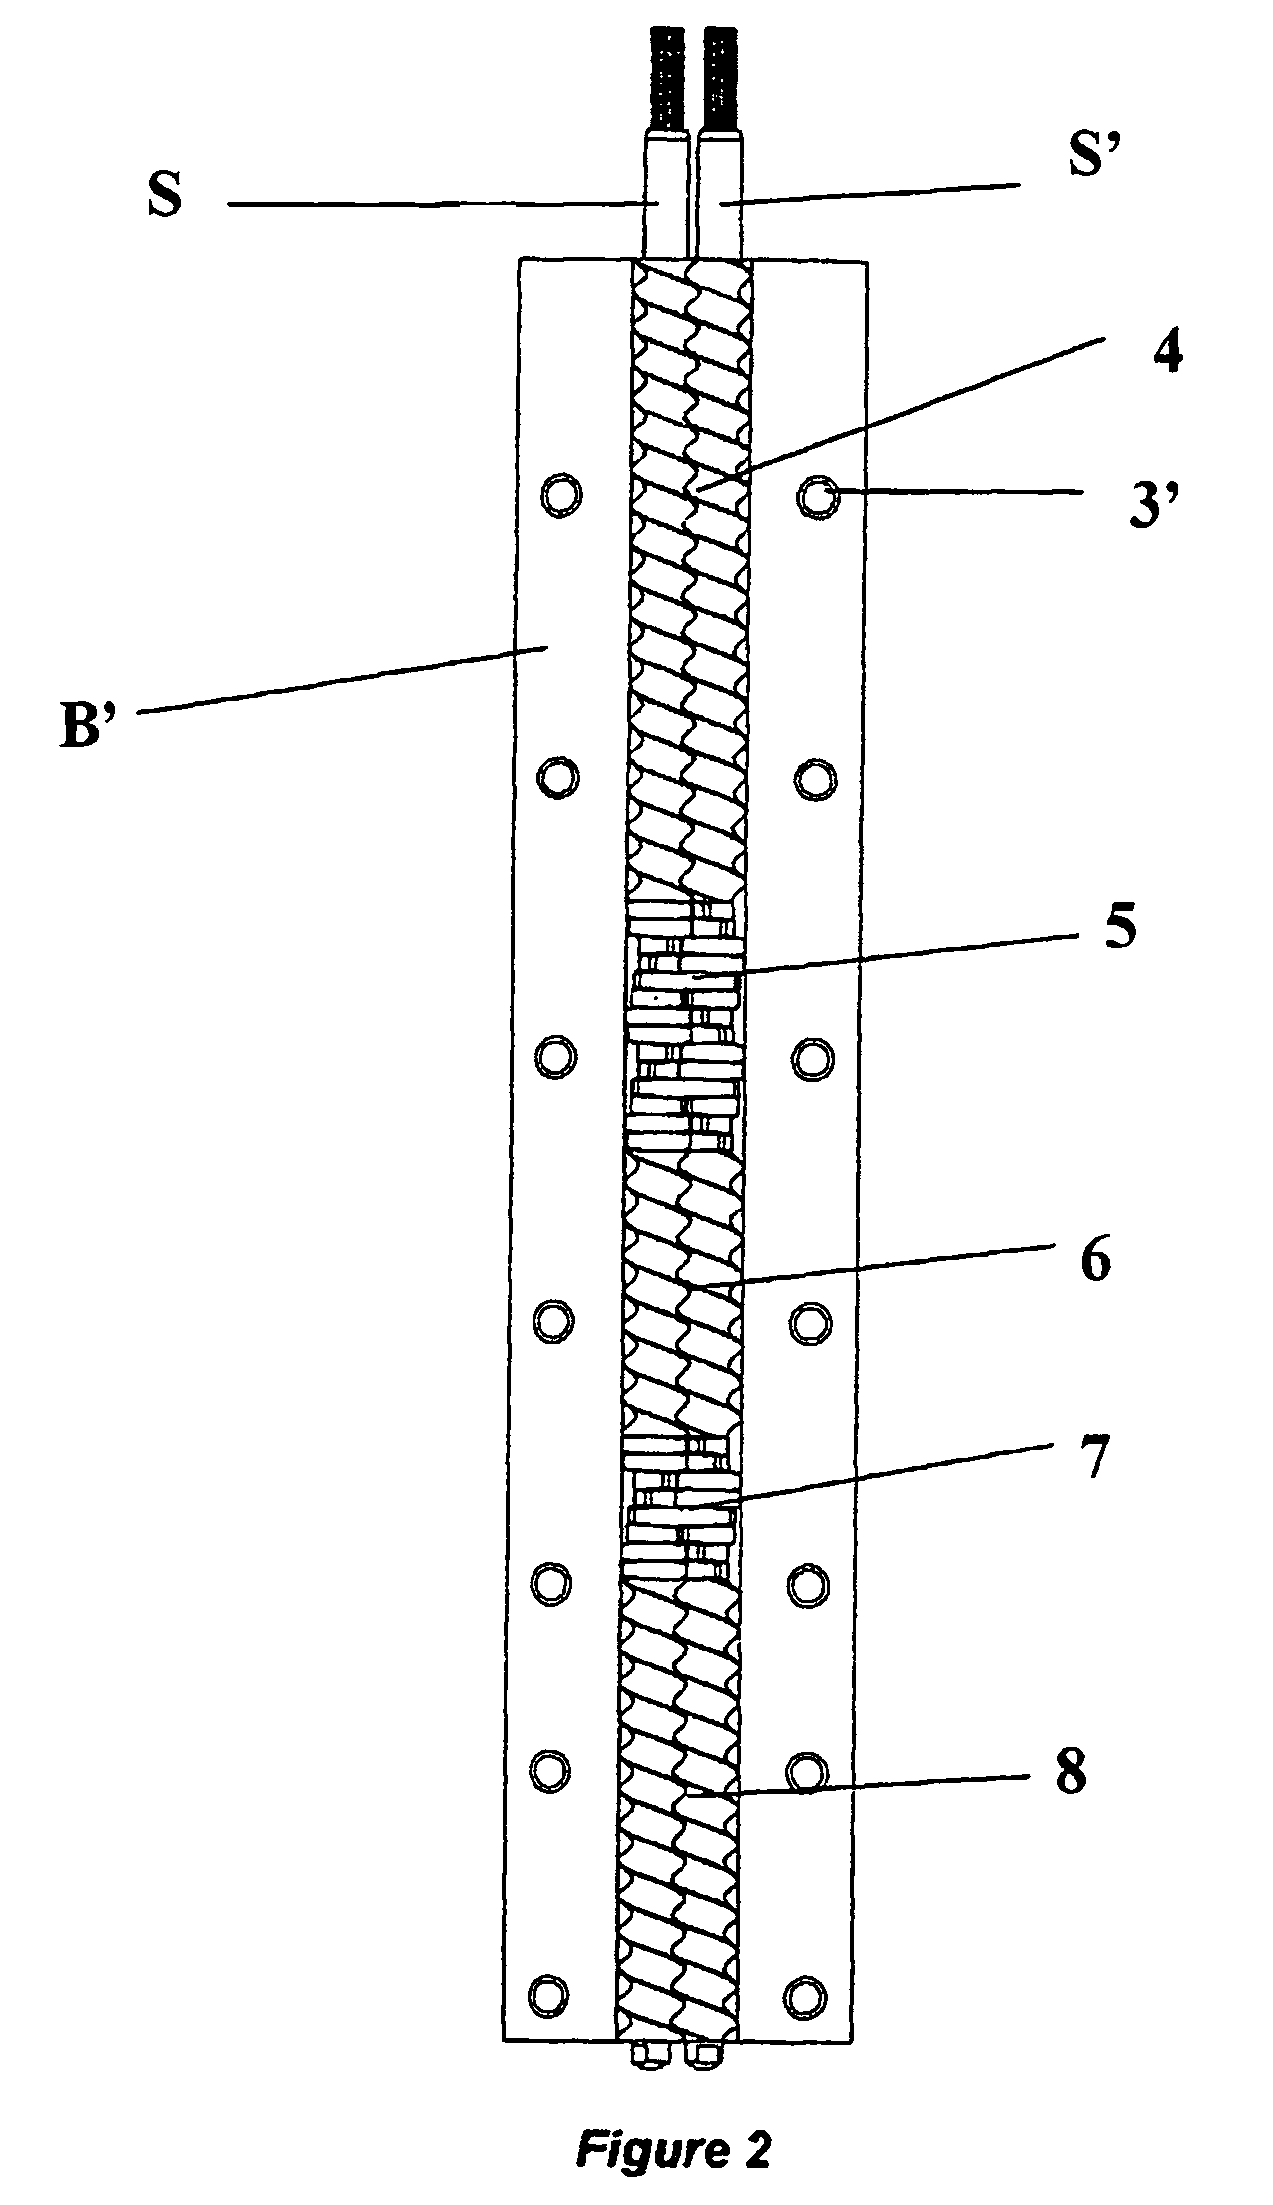 Process and apparatus for continuous wet granulation of powder material